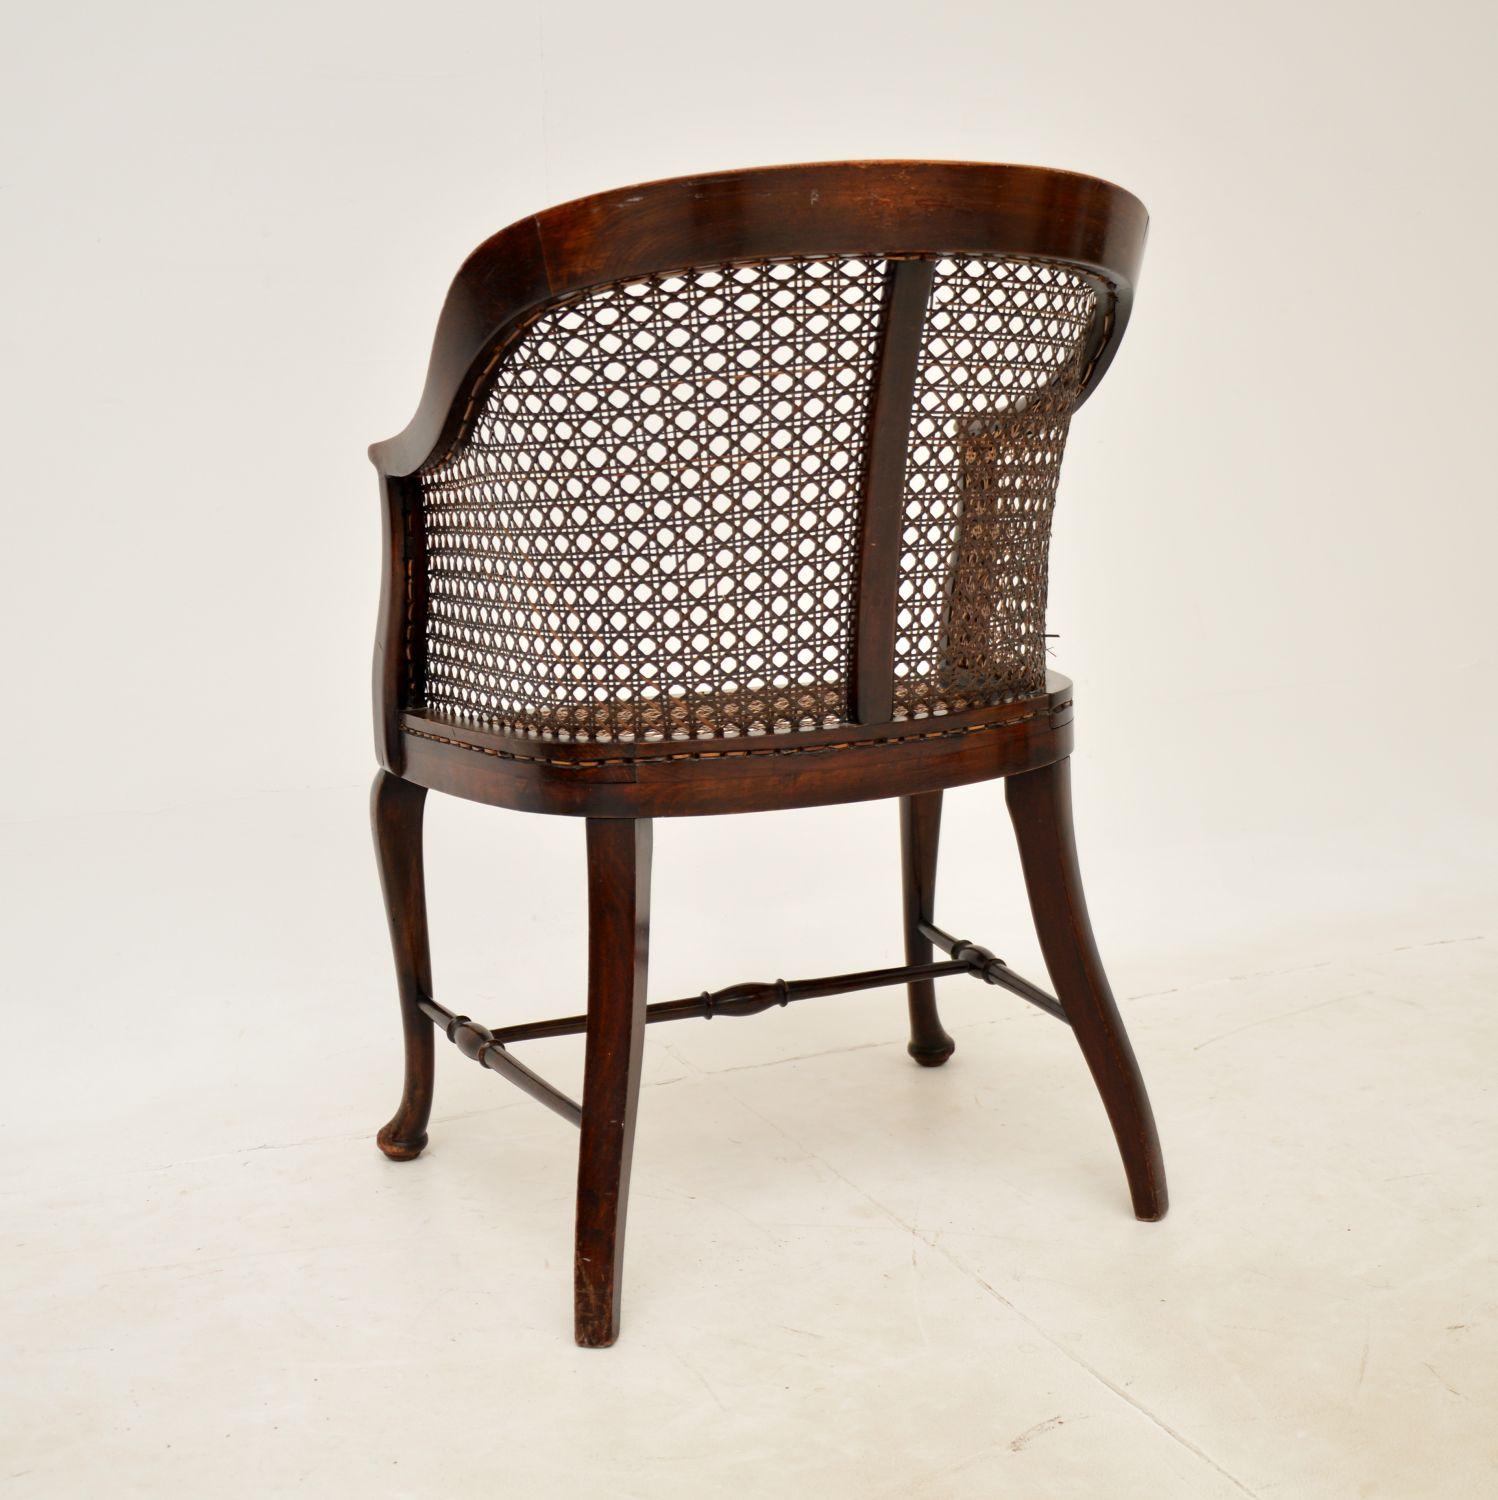 Early 20th Century Antique Edwardian Cane Side Chair